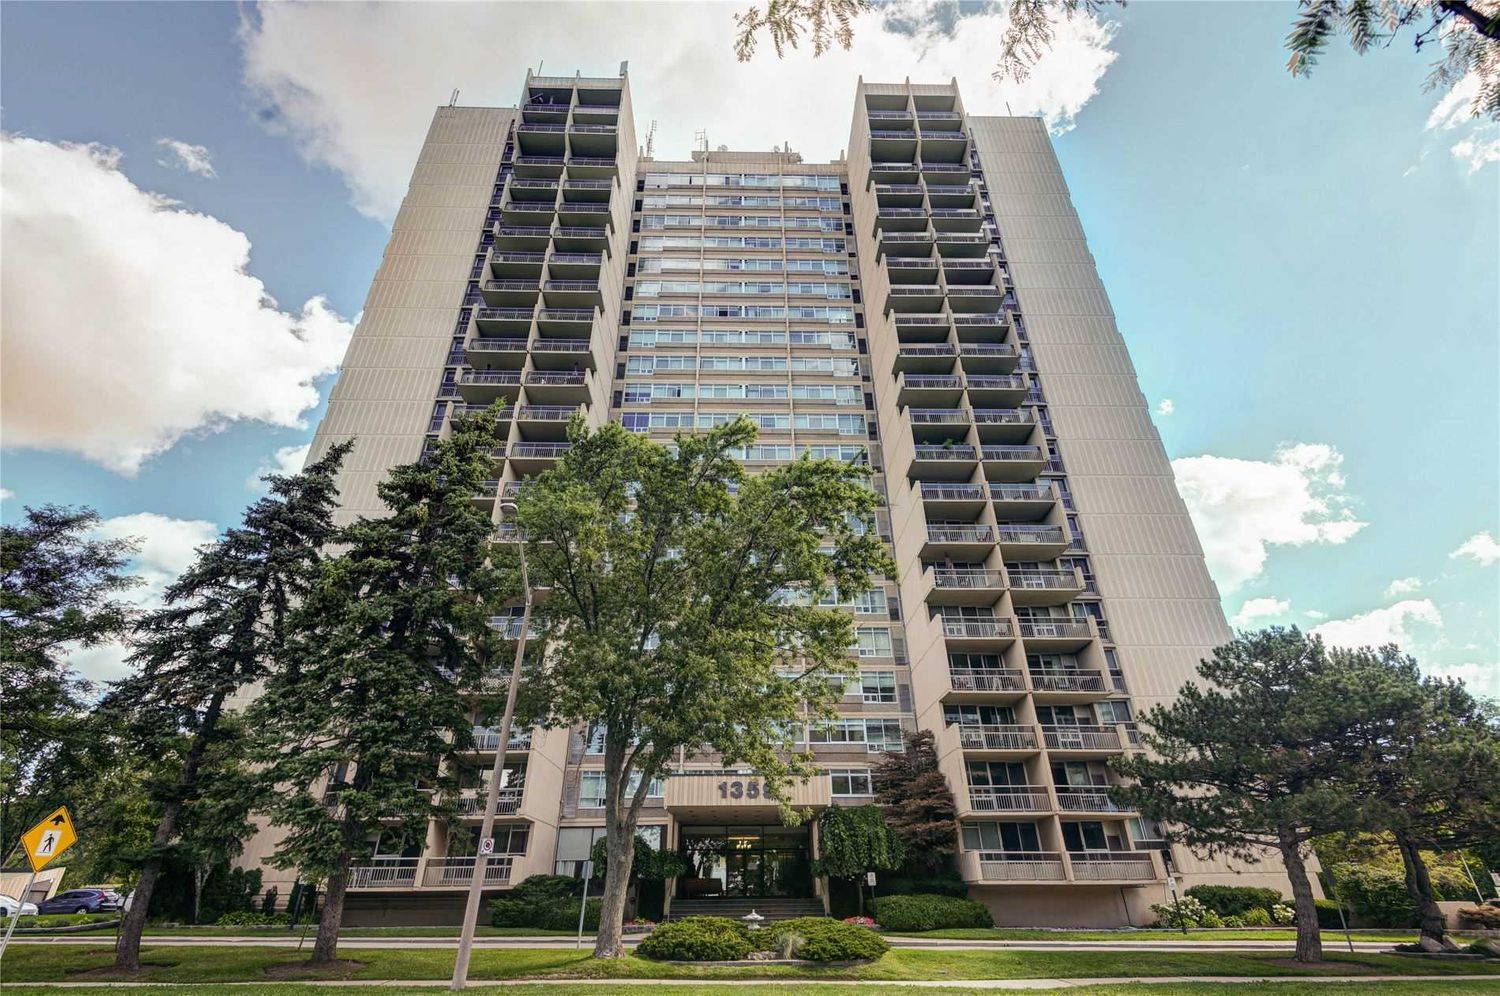 1359 White Oaks Boulevard. The Oaks Condos is located in  Oakville, Toronto - image #2 of 2